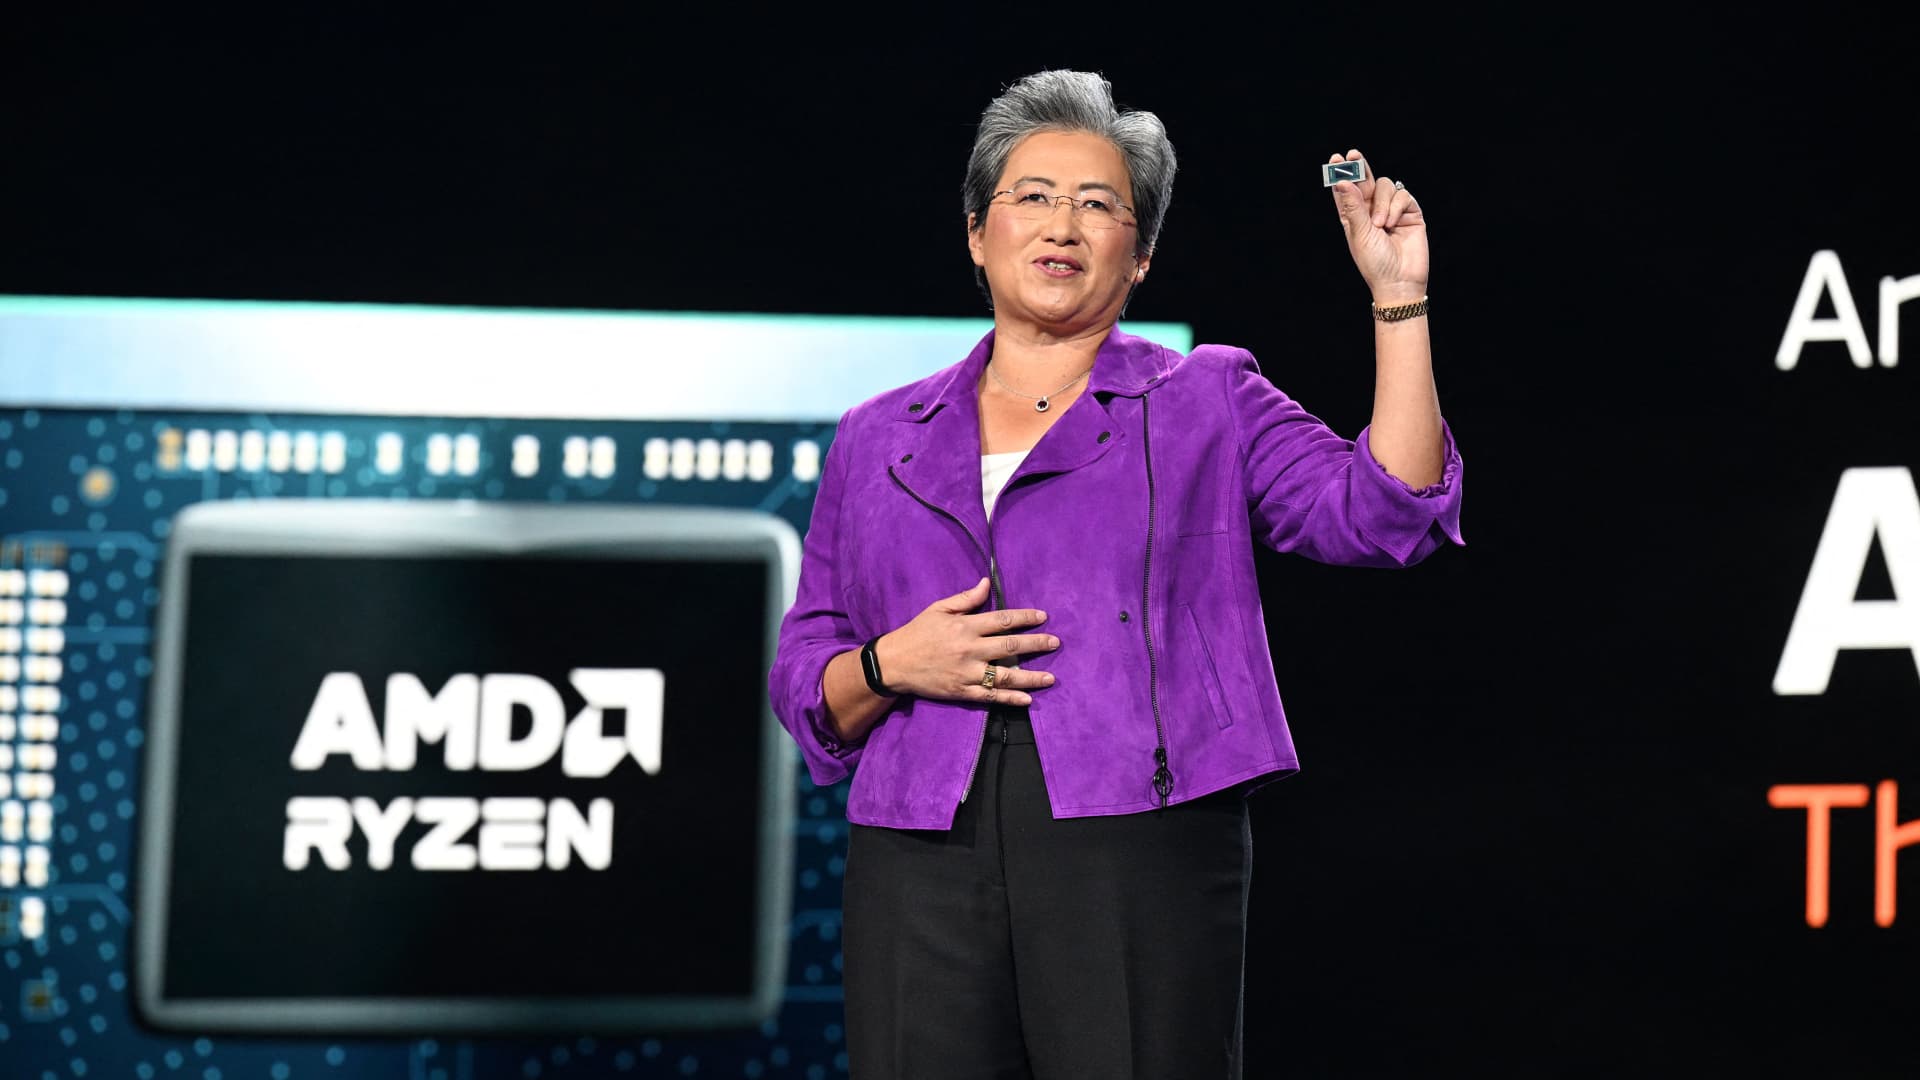 Chip stocks rise after AMD earnings, Fed rate hike